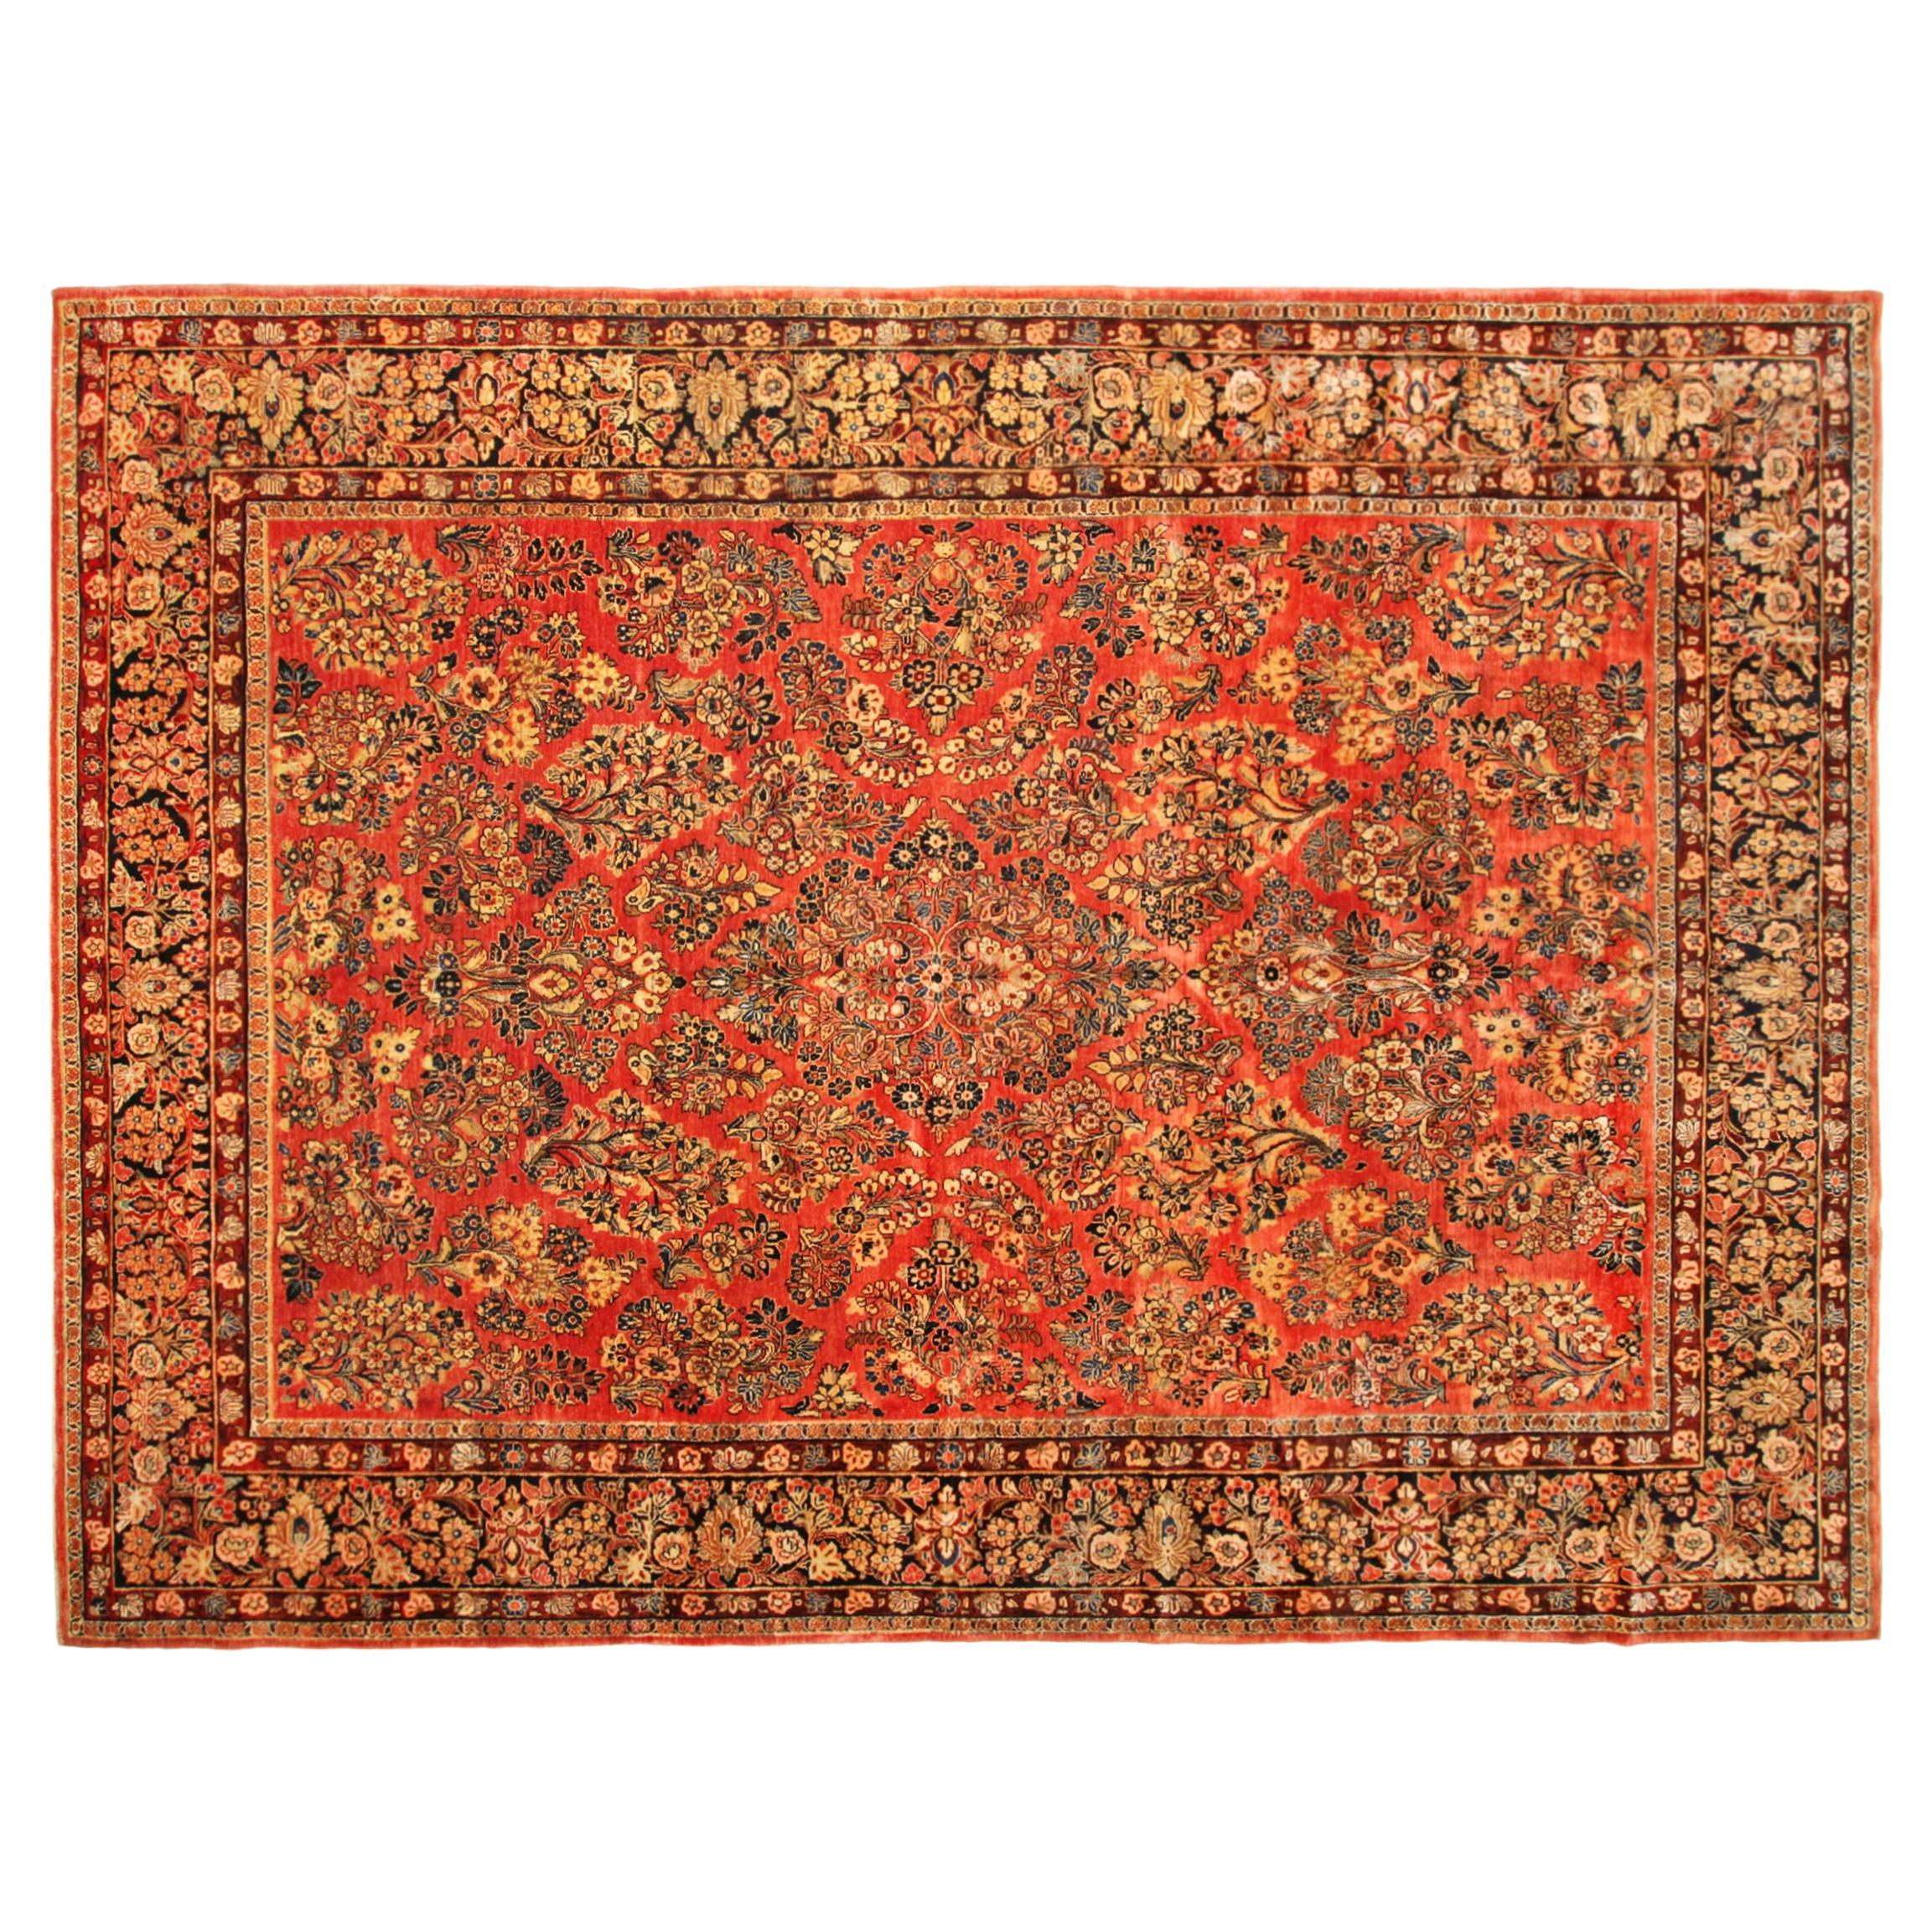 Antique Persian Sarouk Oriental Rug, in Room Size, with Intricate Floral Design